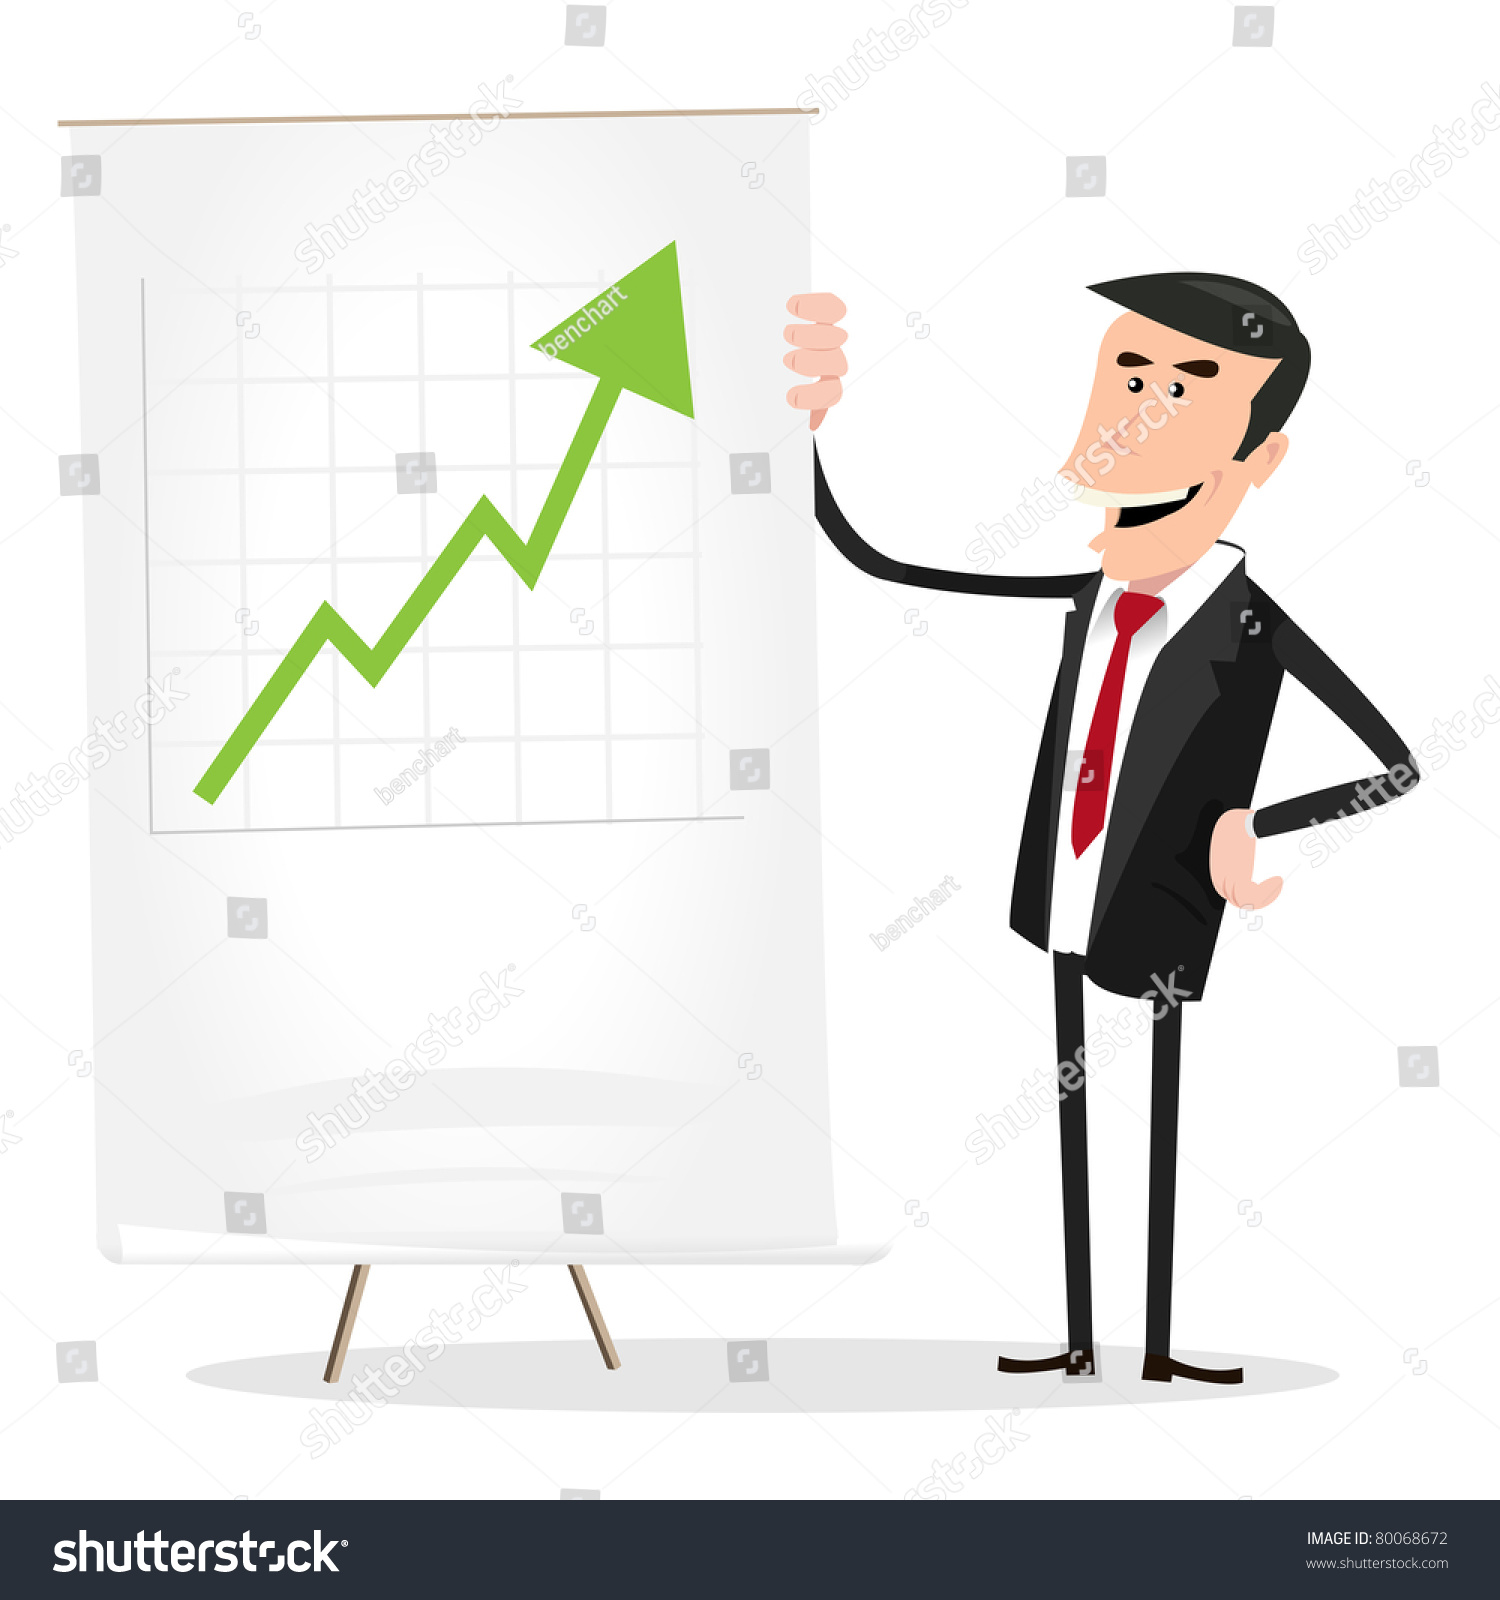 Big Earnings This Month !/ Illustration Of A Cartoon Happy Businessman